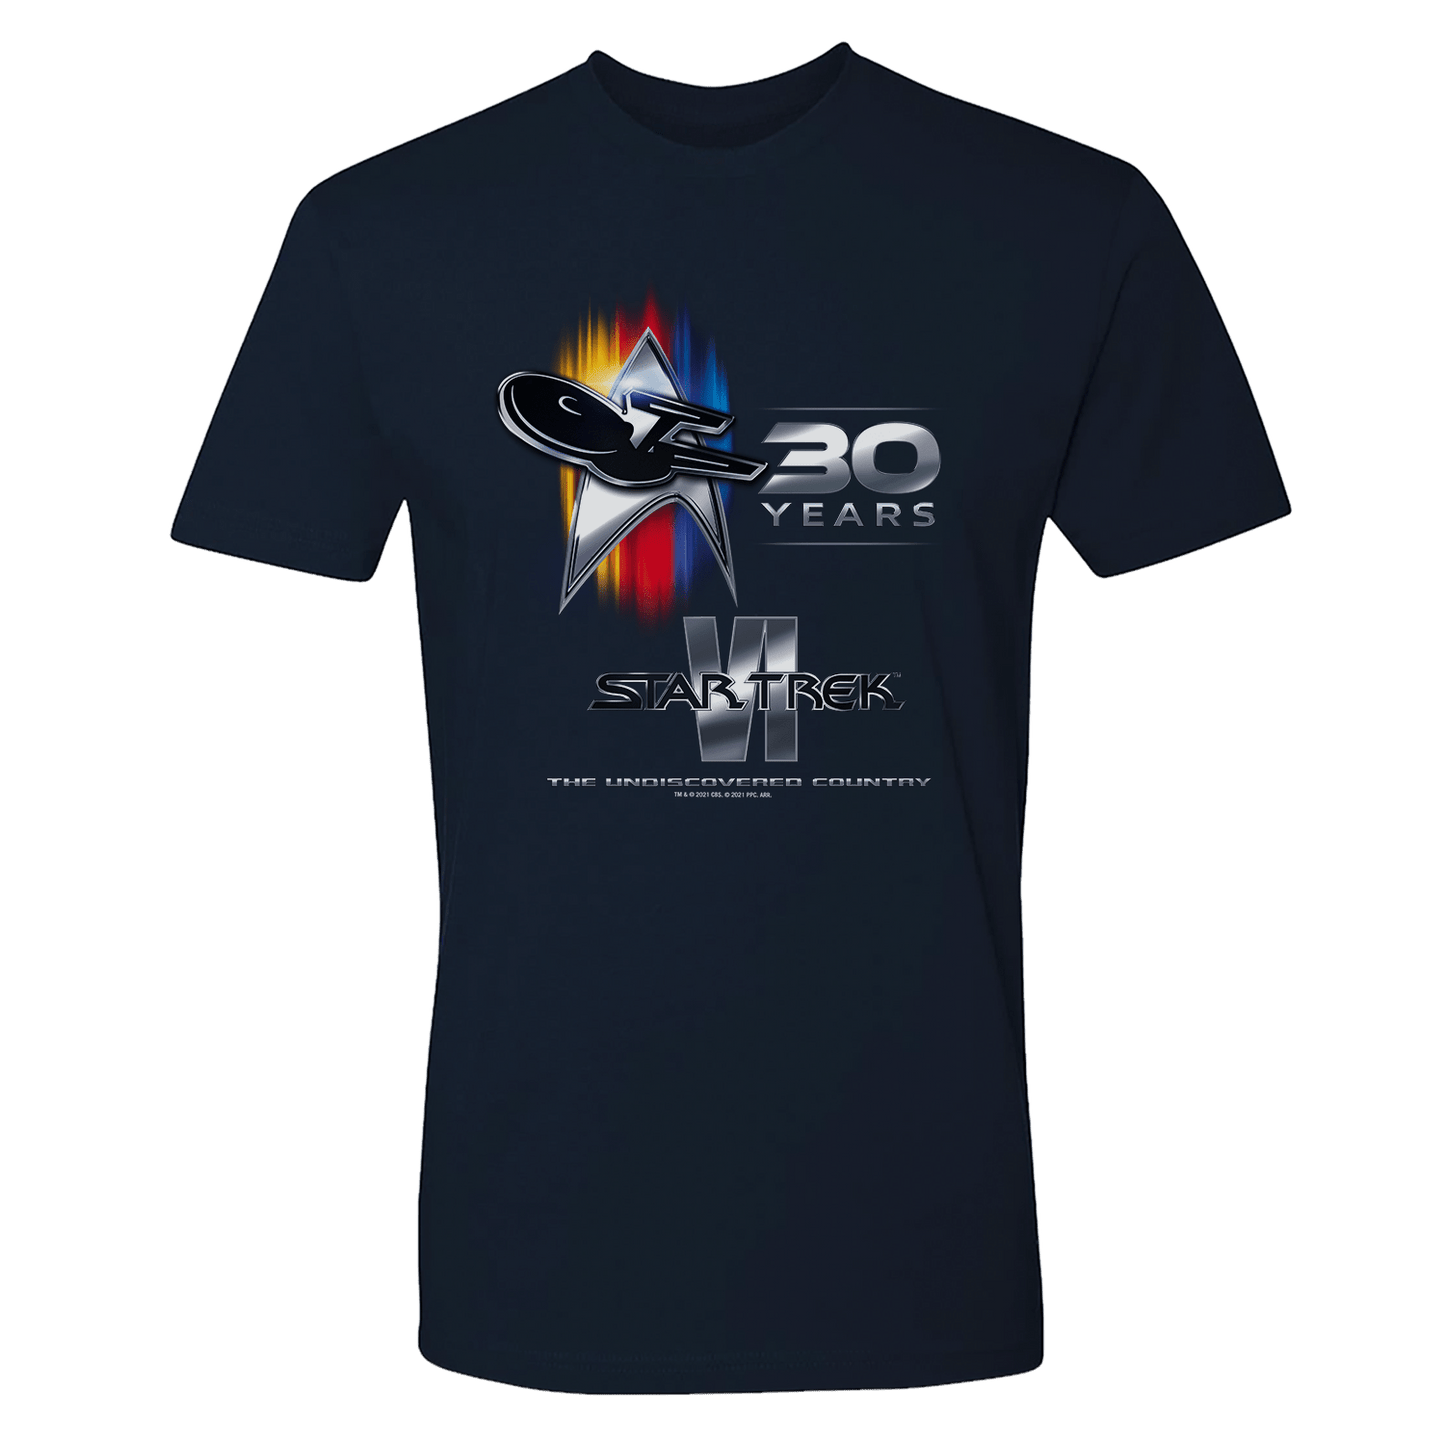 Star Trek VI: The Undiscovered Country 30th Anniversary Adult Short Sleeve T - Shirt - Paramount Shop